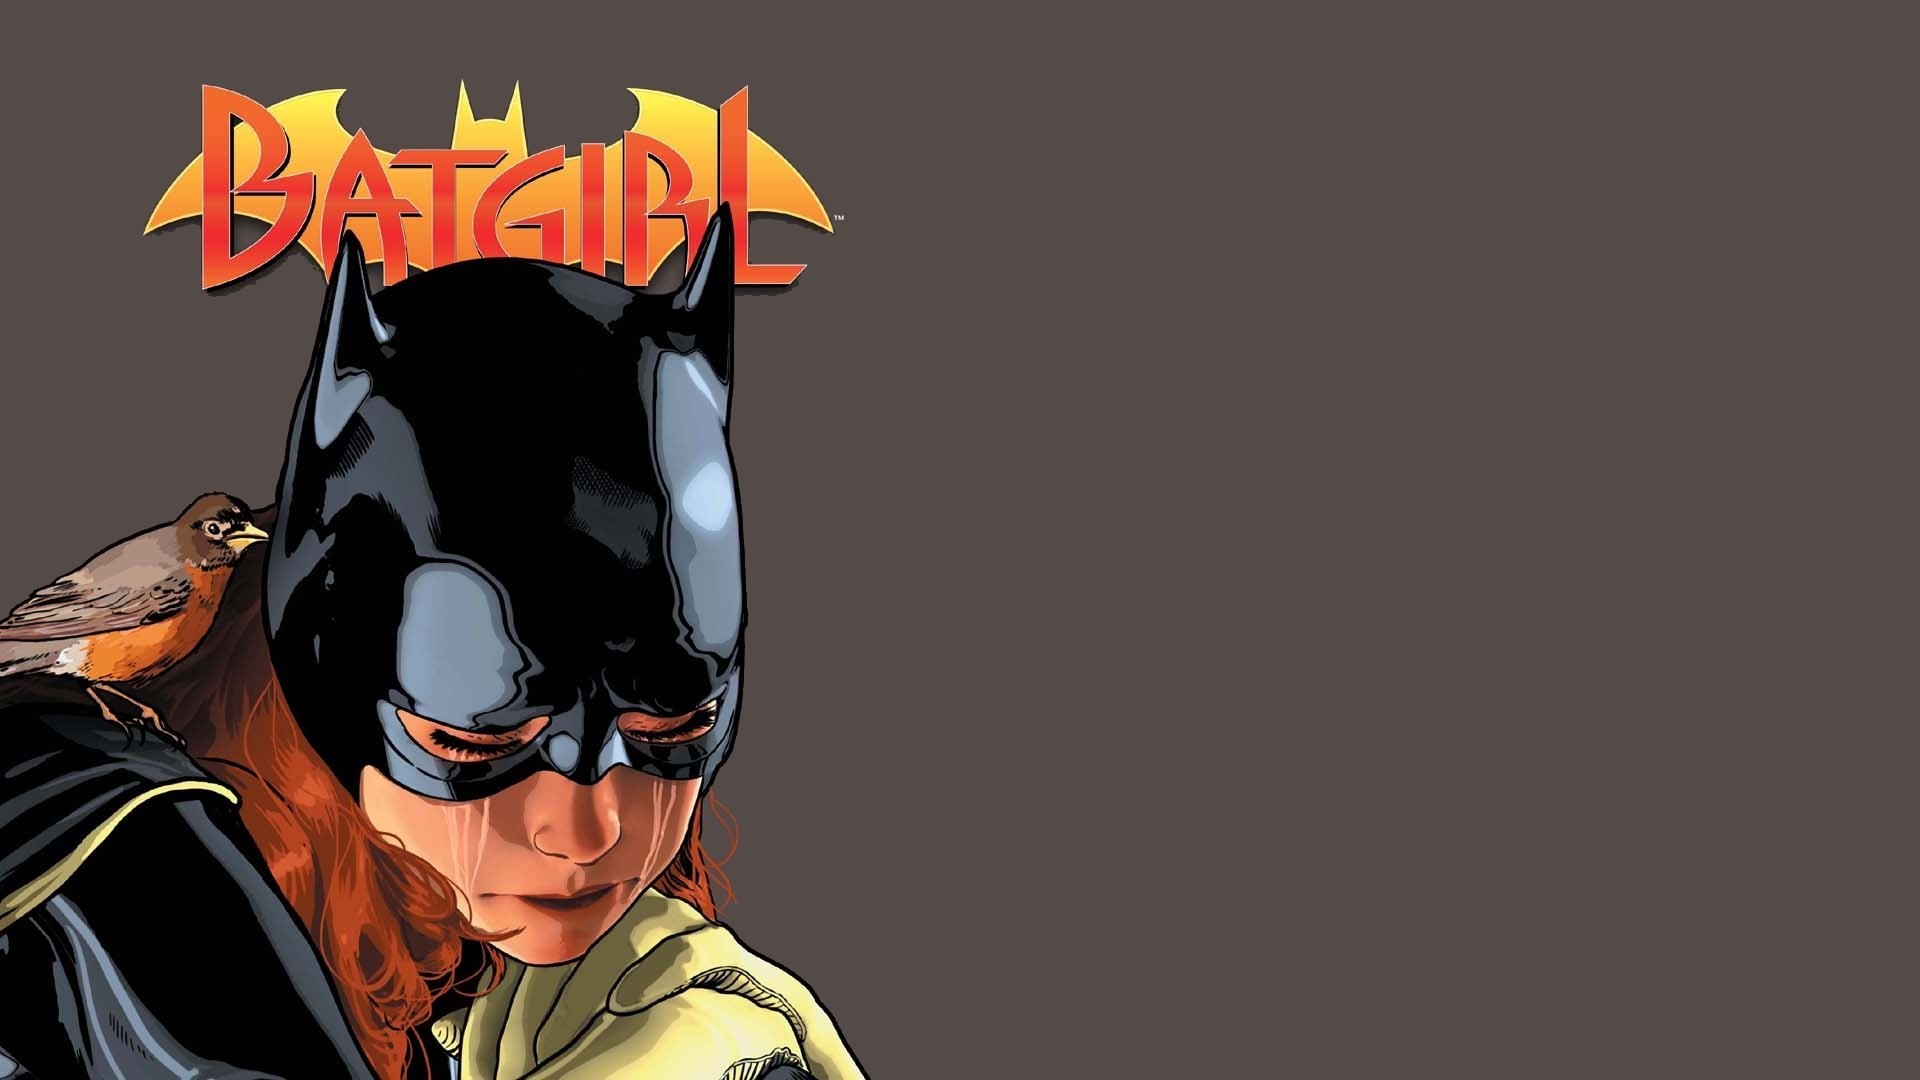 1920x1080 Backgrounds In High Quality - batgirl picture (Sunny Blare )